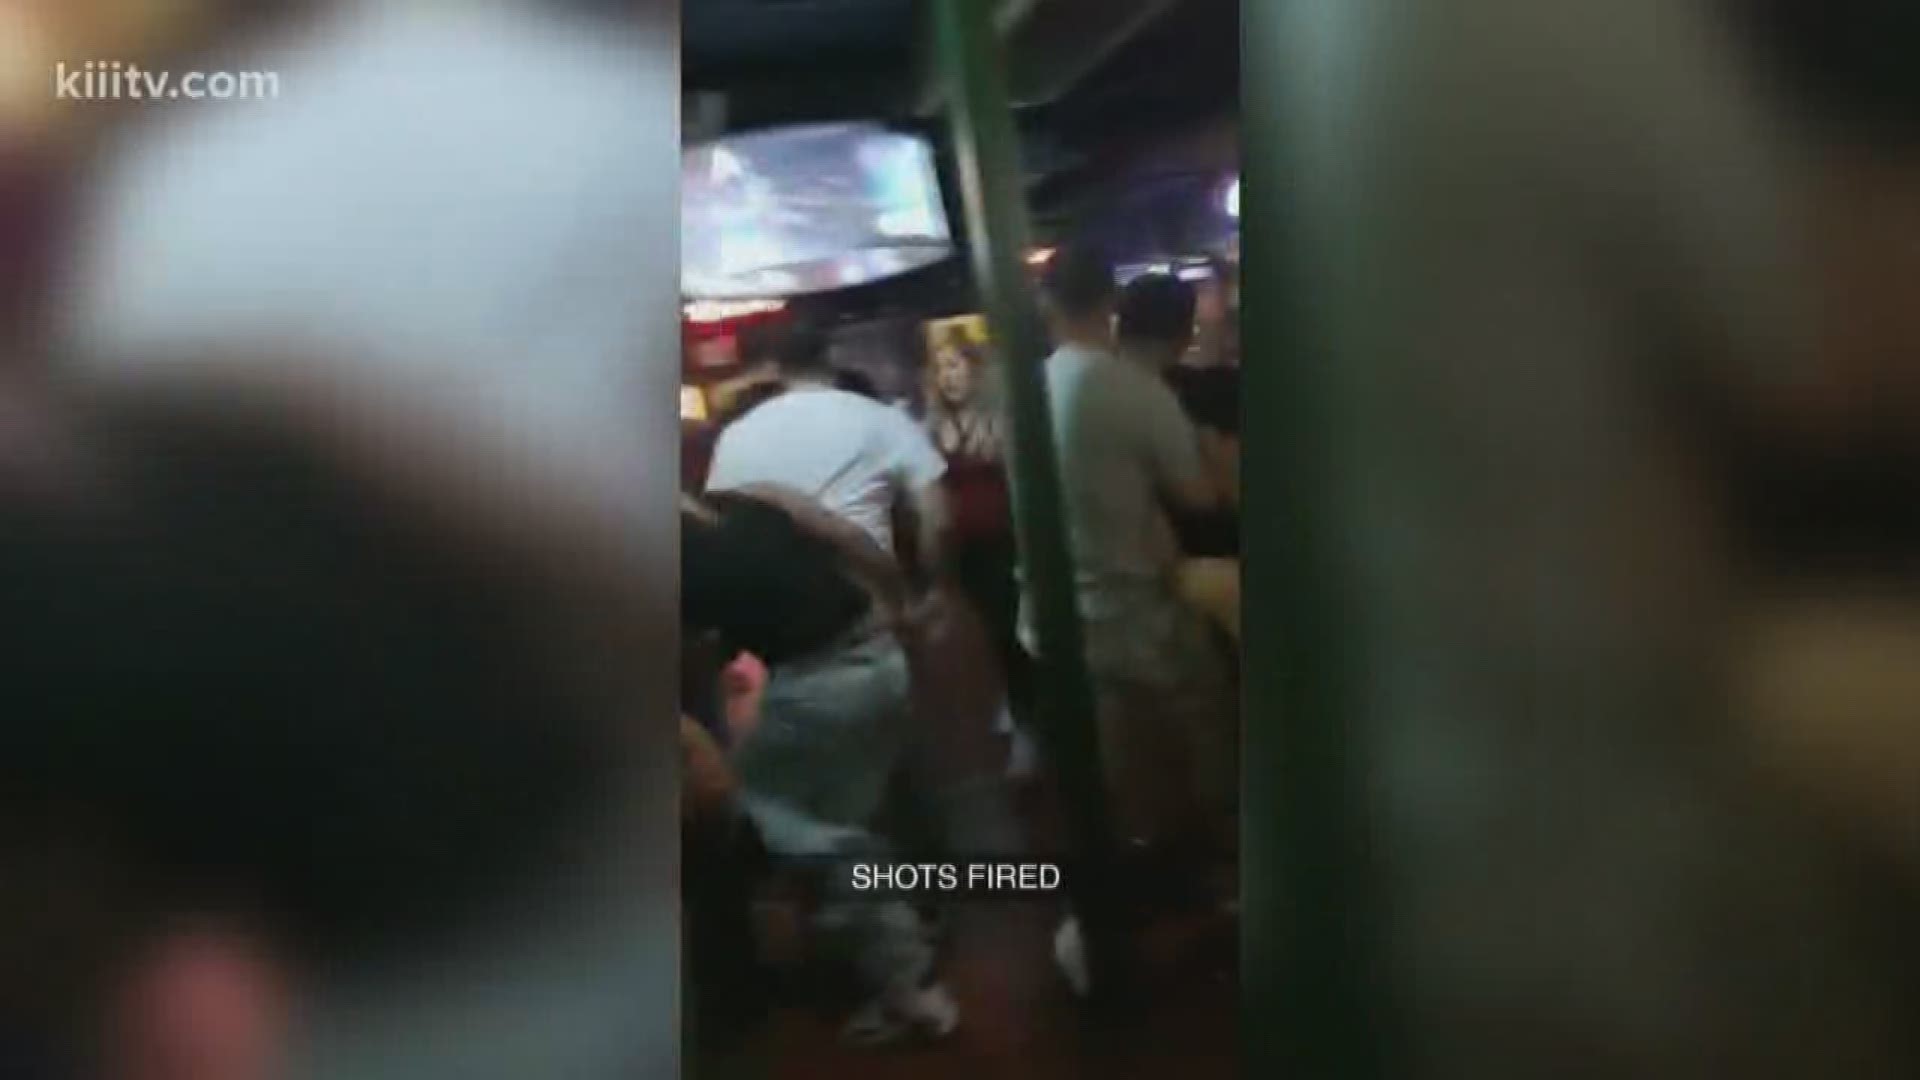 Police said what started as a fight at a Corpus Christi sports bar Friday night led to reports of shots being fired.